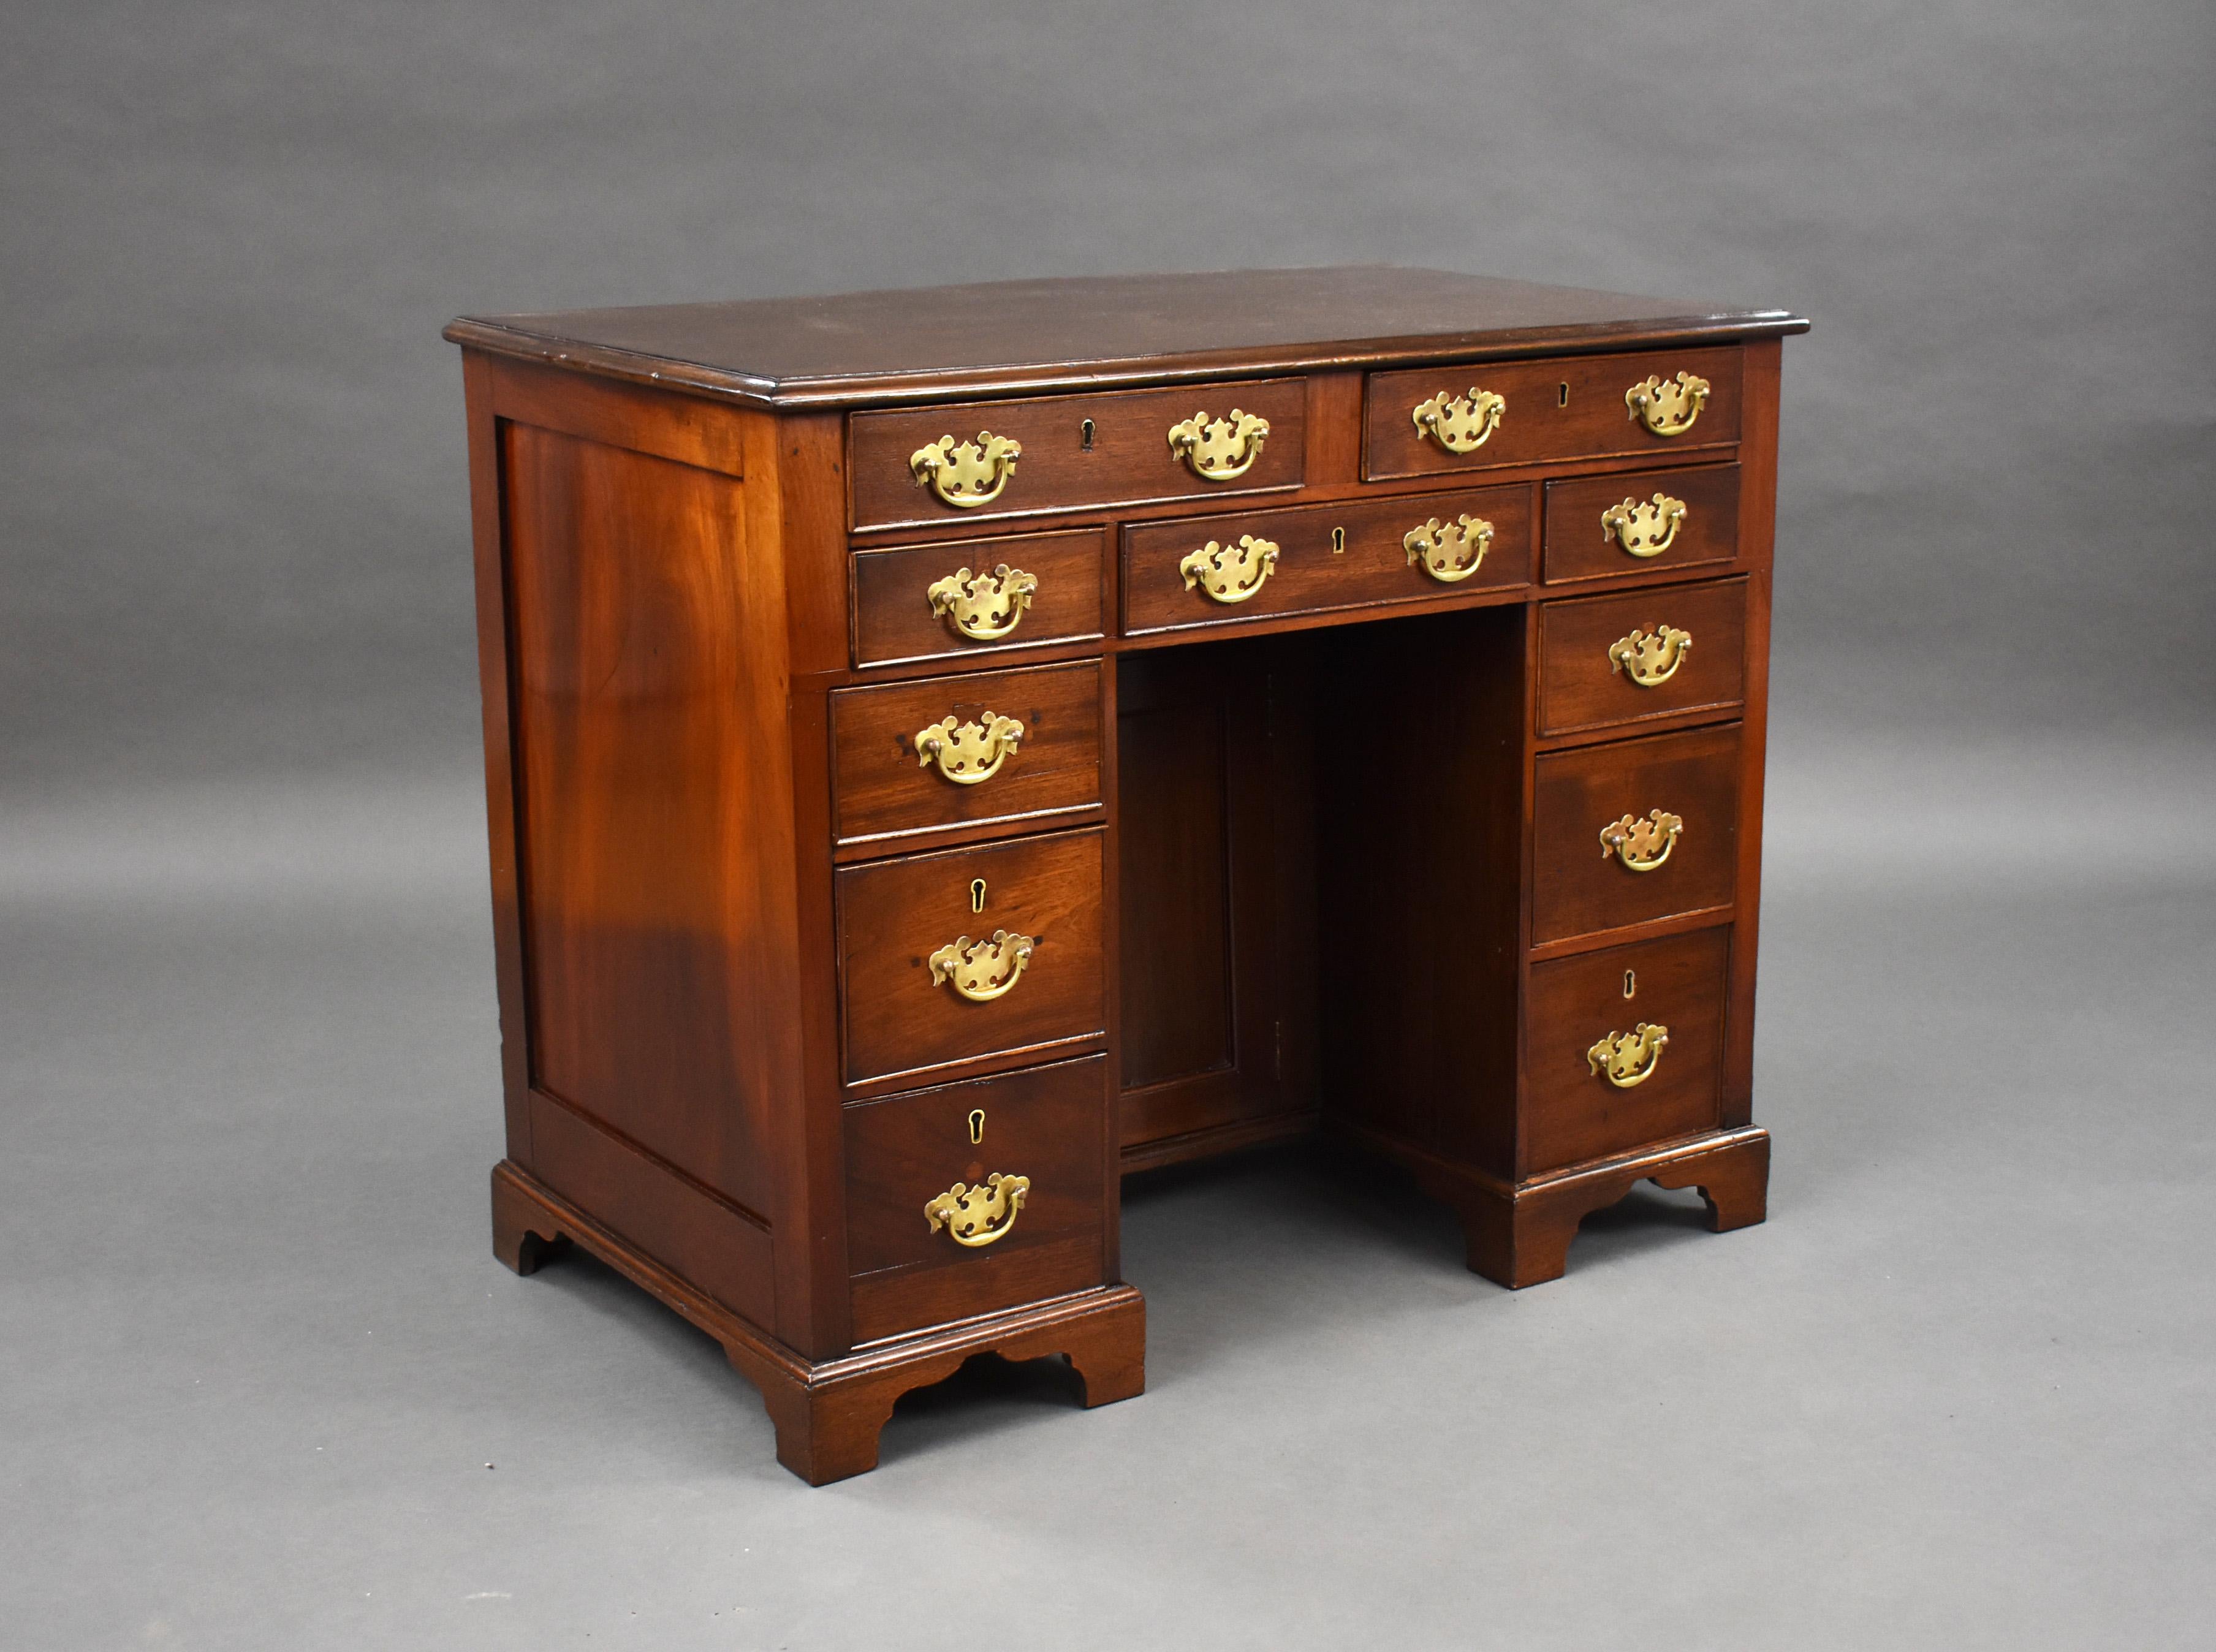 For sale is a George III mahogany kneehole desk, having a total of 11 drawers and a cupboard to the centre, the desk stands on small bracket feet and is in very good condition for its age. 

Measures: width: 93cm, depth: 53cm, height: 76cm.